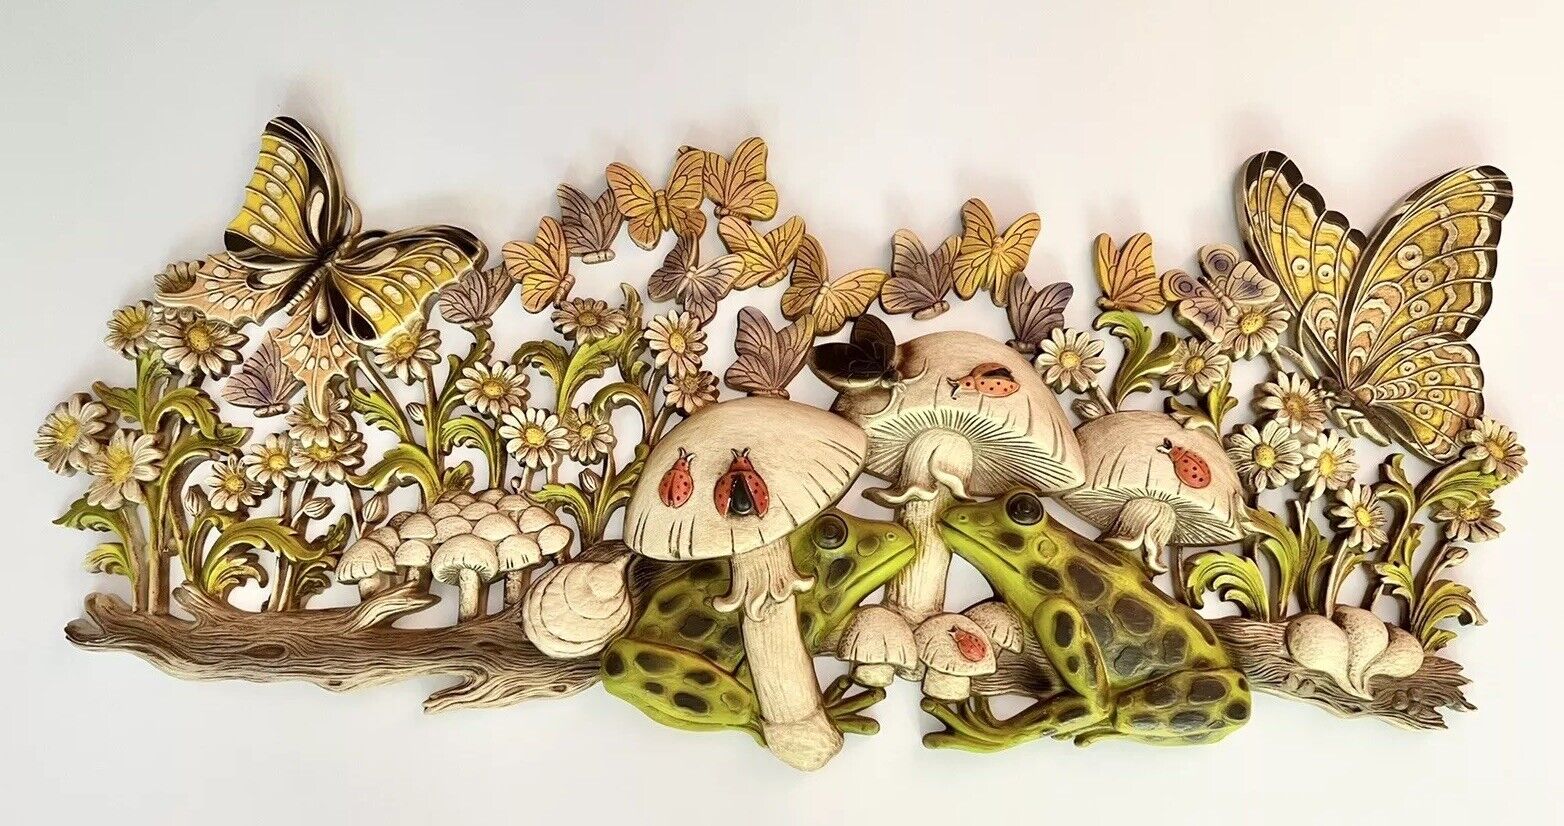 MCM Butterflies Mushrooms Frog Flowers Wall Plaque Hanging Burwood Products 1971